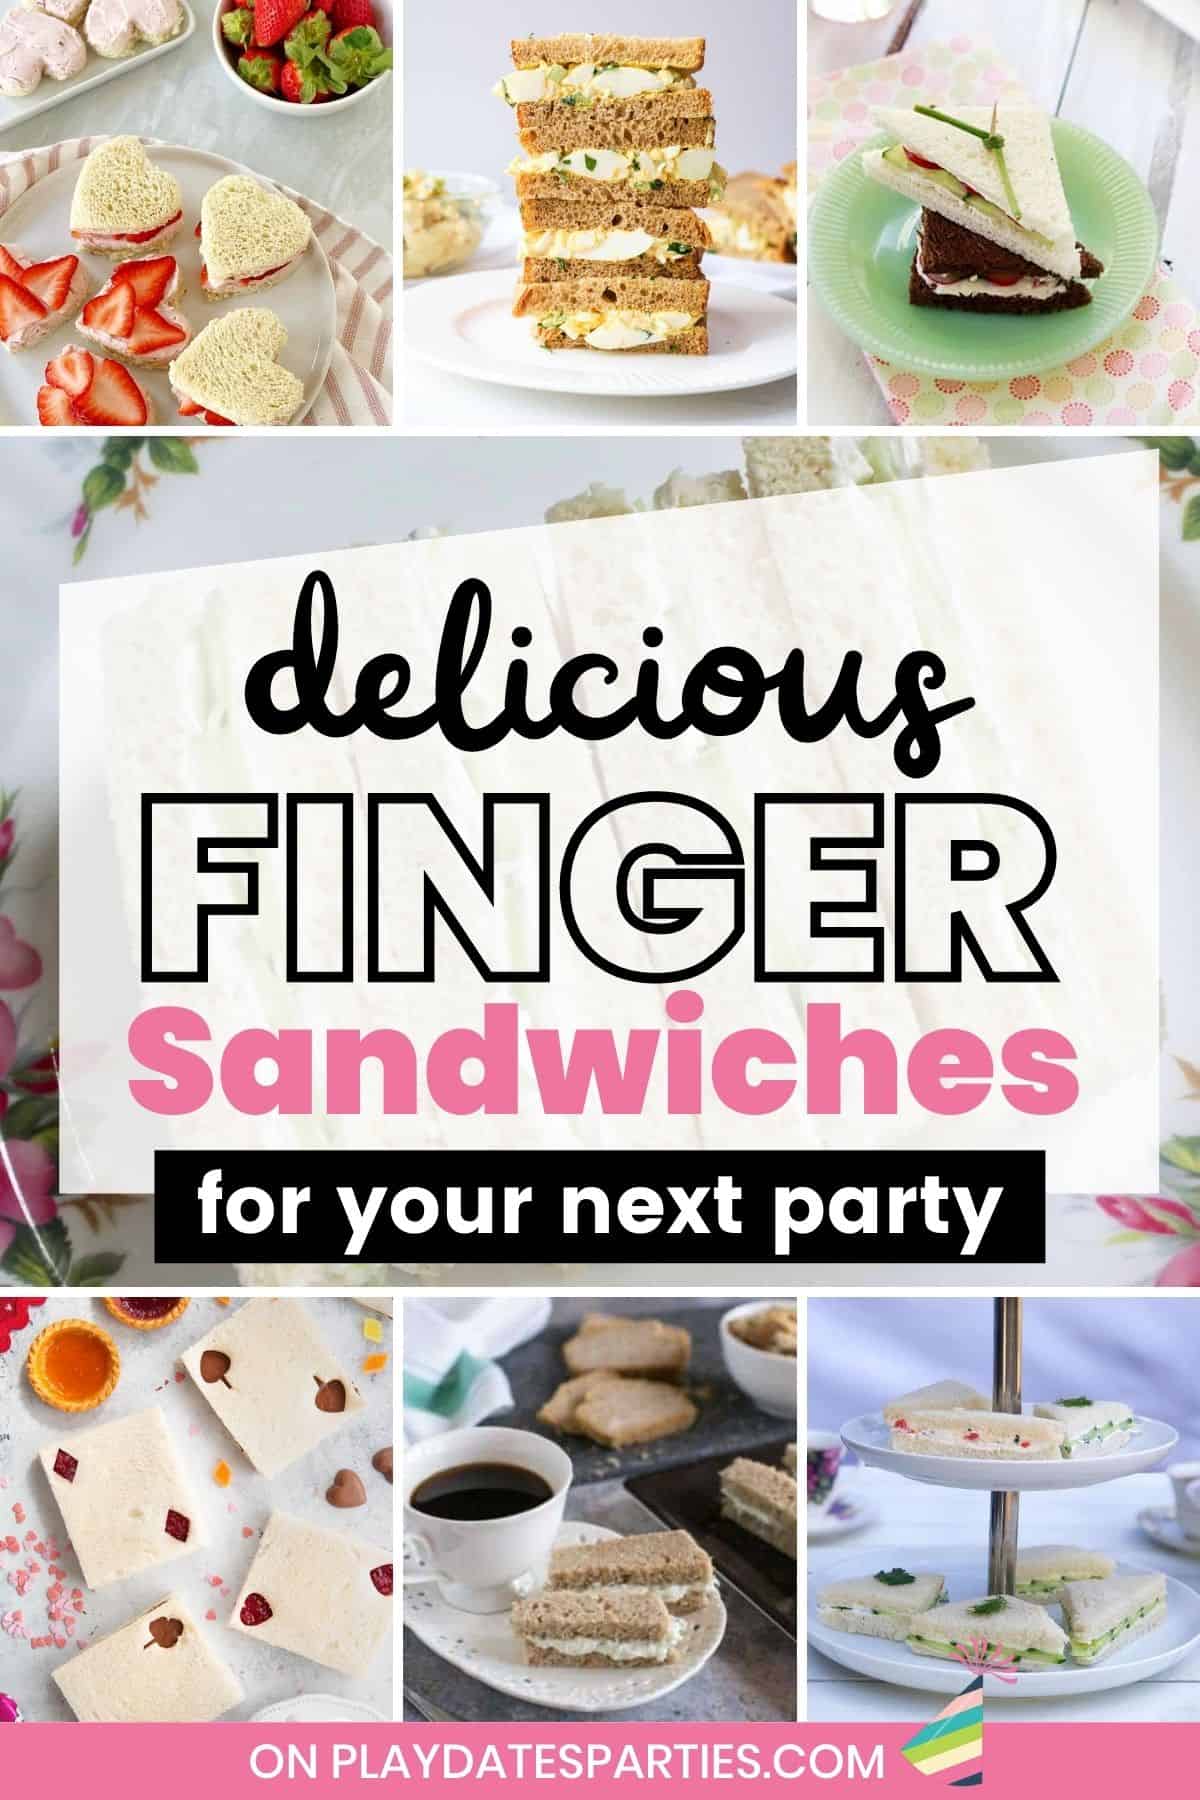 Collage of sandwiches with text overlay delicious finger sandwiches for your next party.